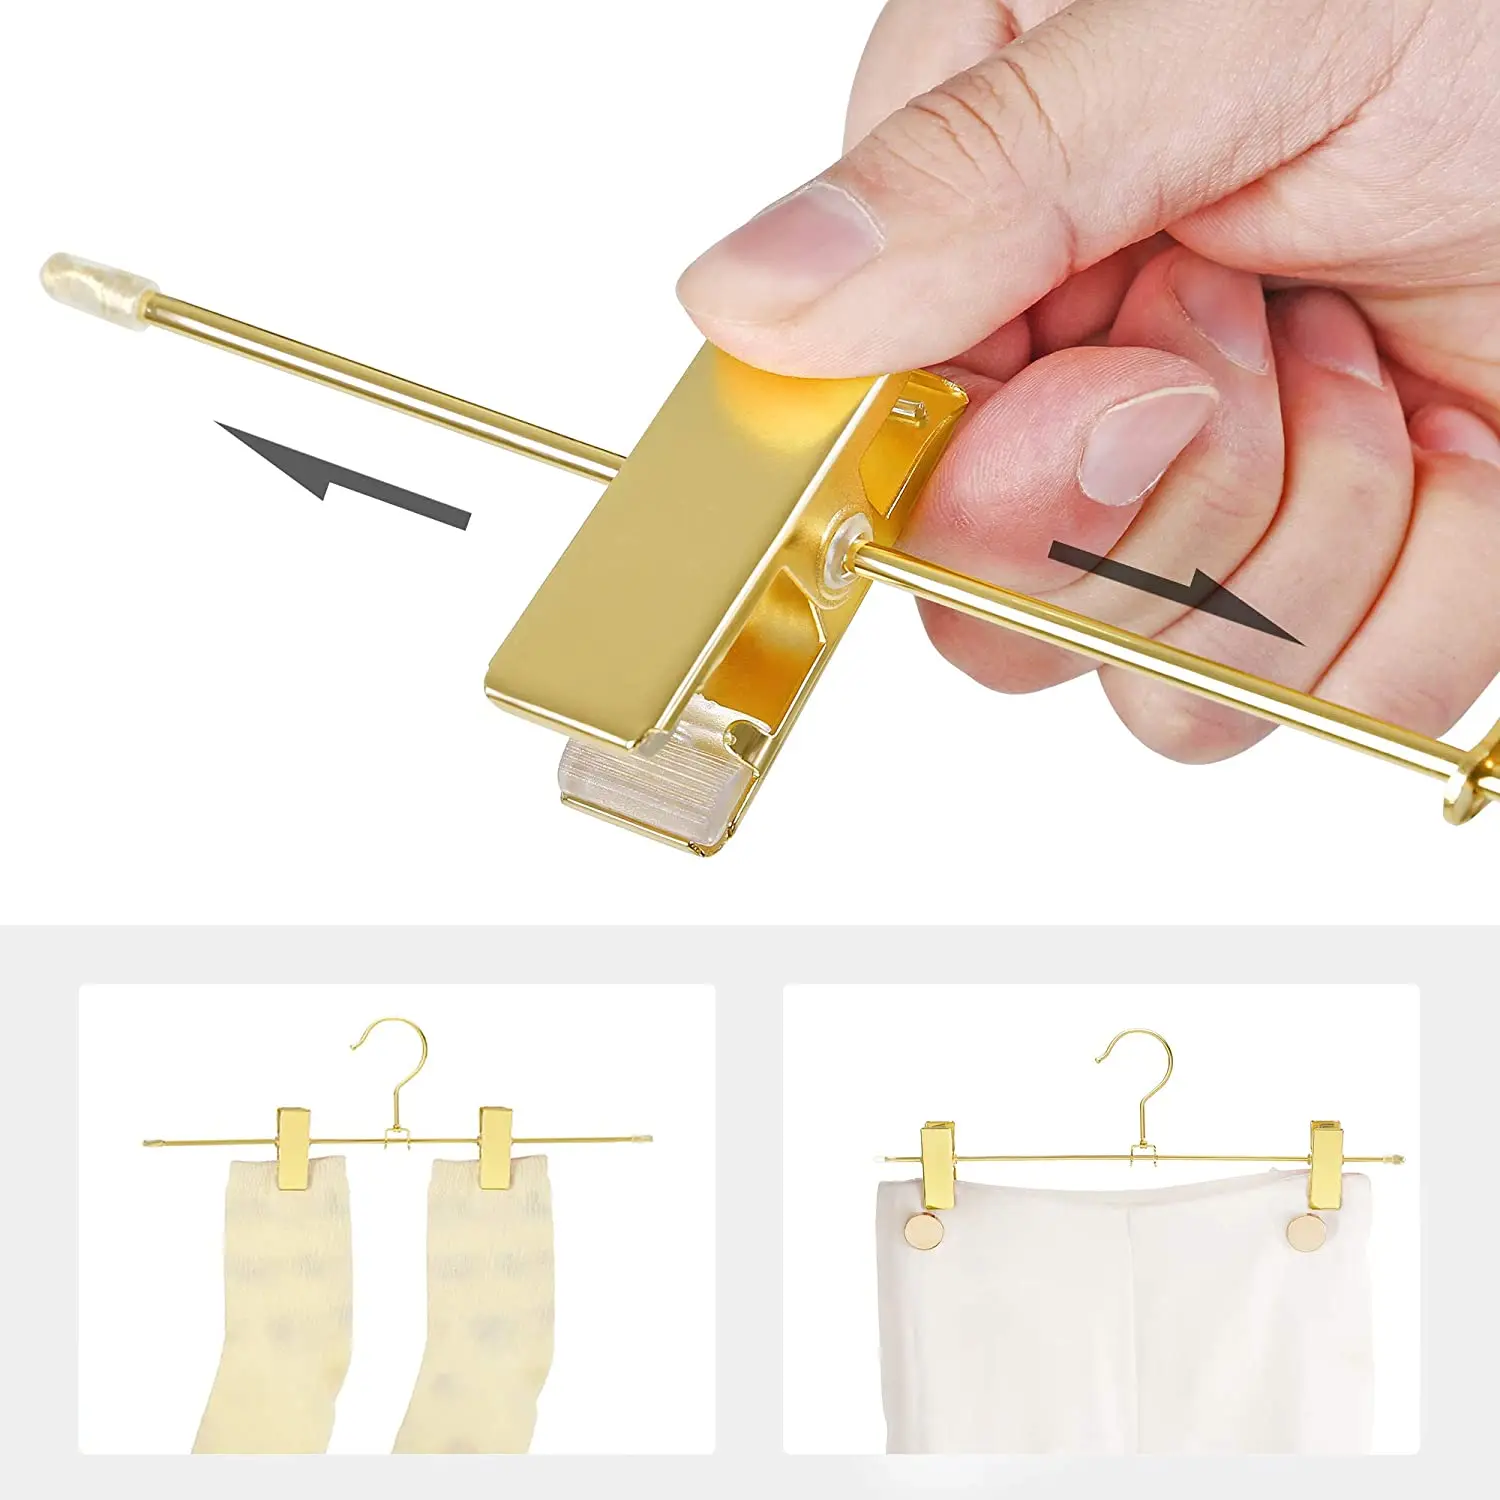 Trouser Hangers Made of Metal, 10 Pieces, Clothes Hangers, 30.5cm, with 2 Non- Clips, for Skirts, Pants, Underwear-2 images - 6